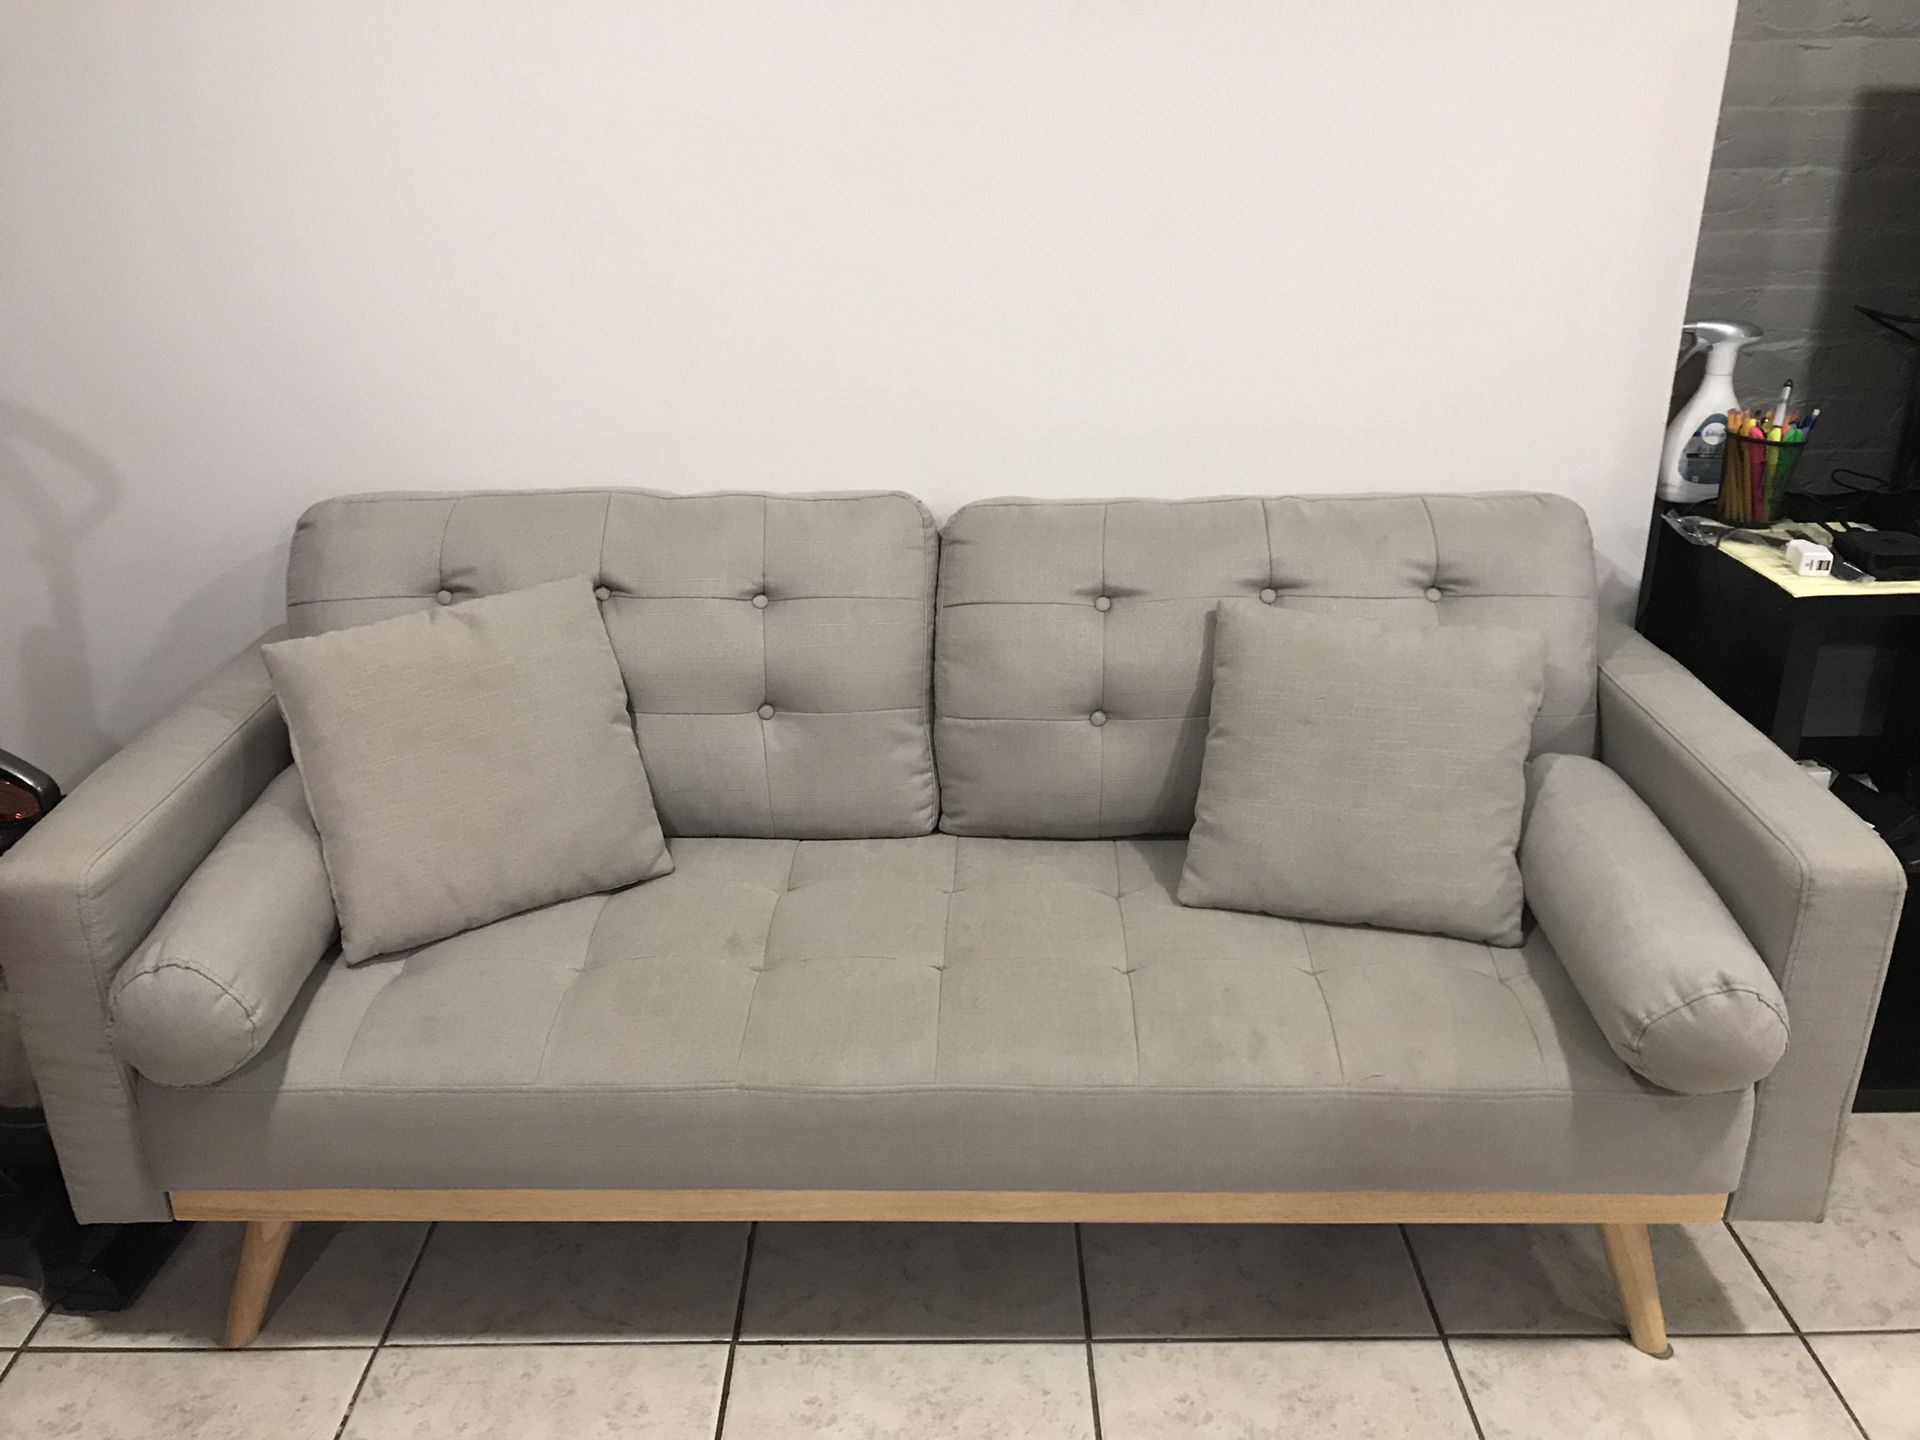 Couch - Very Good condition